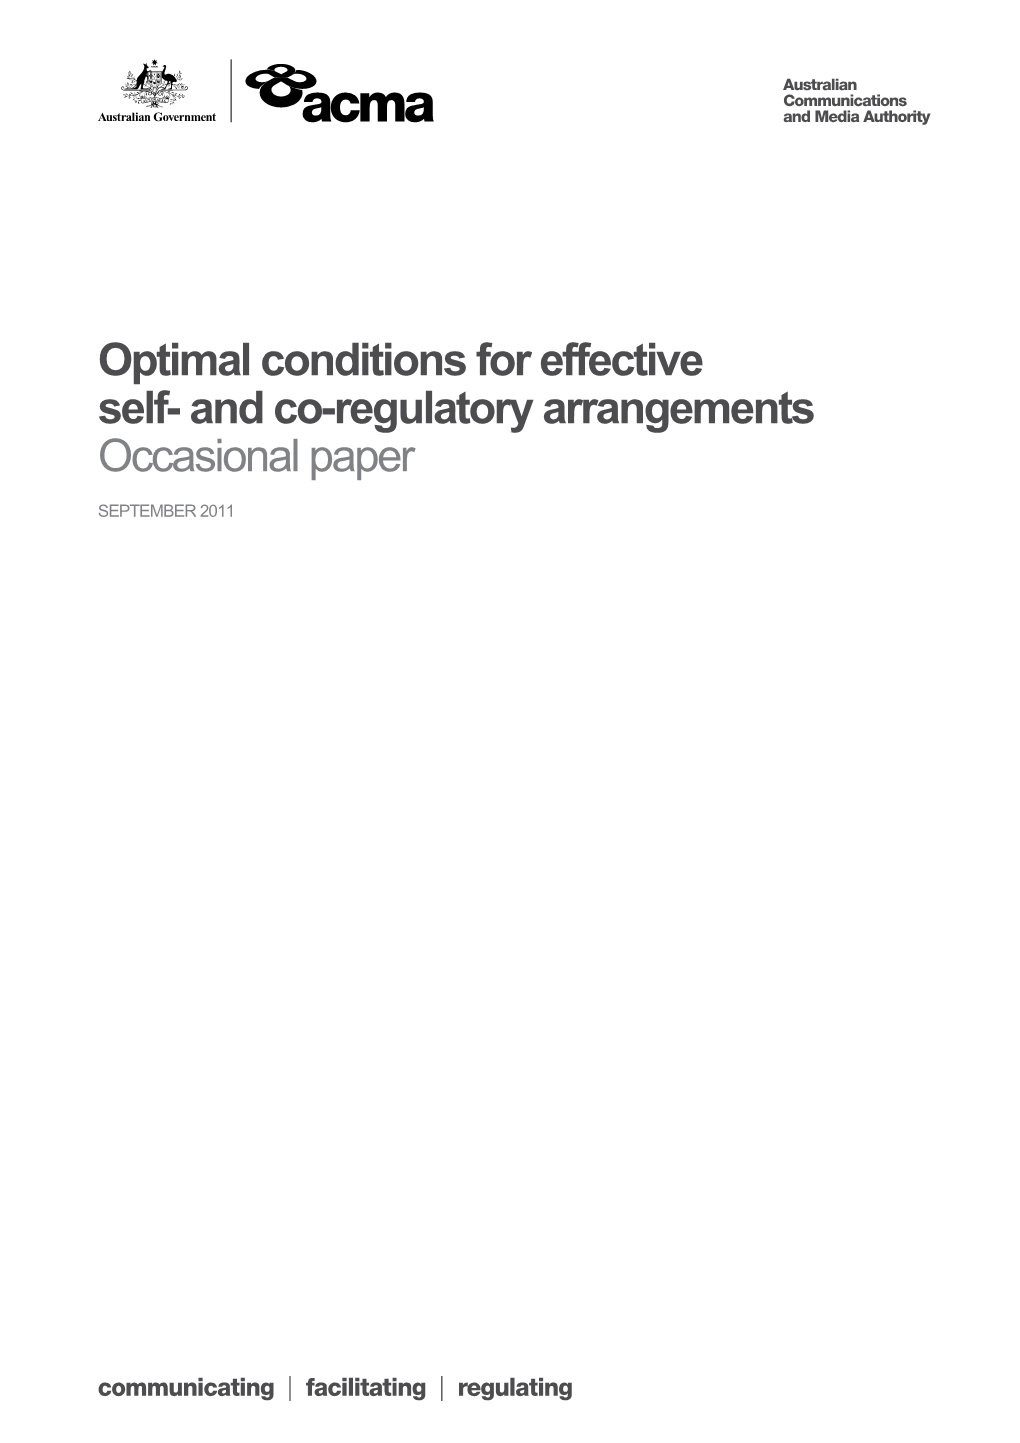 Optimal Conditions for Effective Self- and Co-Regulatory Arrangements